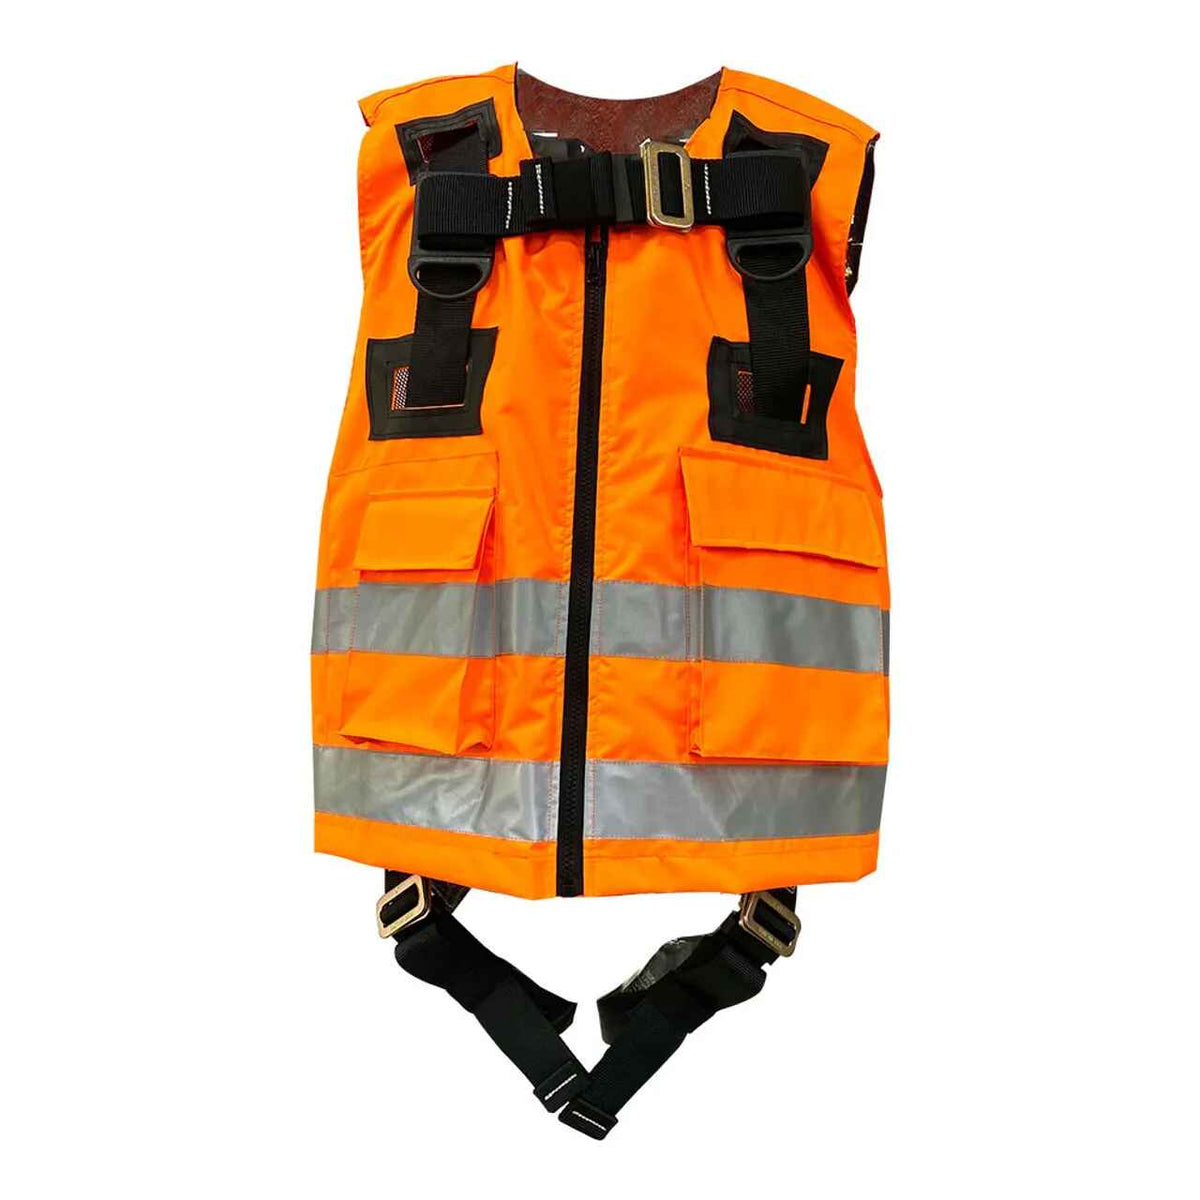 Red Safe Guard Ring Life Vest Stock Photo 128668820